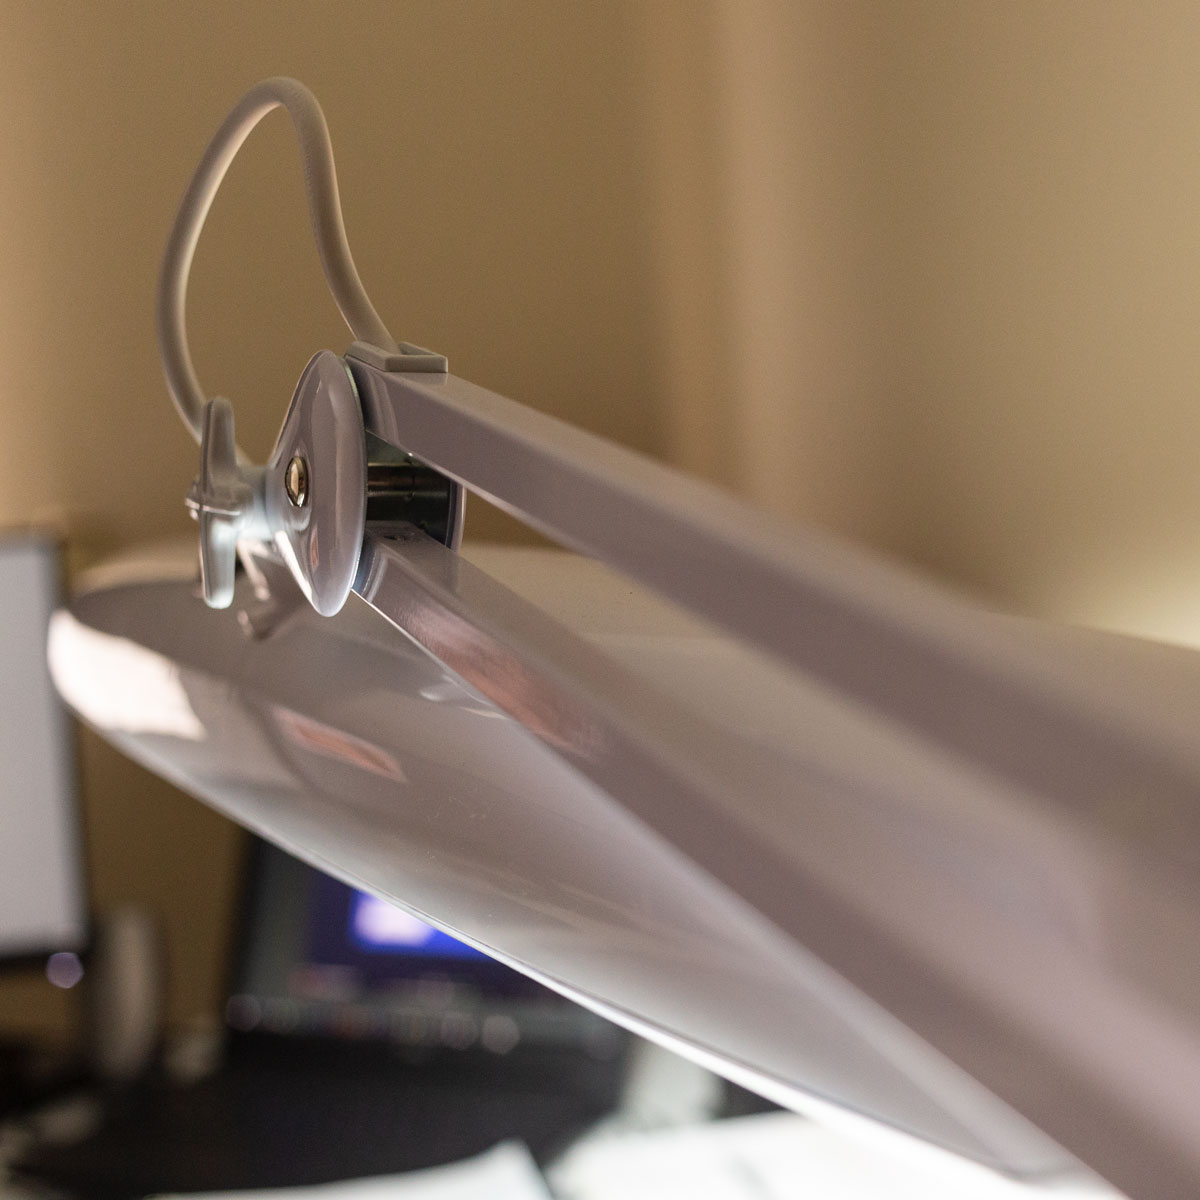 A close-up image of a desk lamp showing the twin tubes of it's support arm leading in to the lamp adjustment screw.